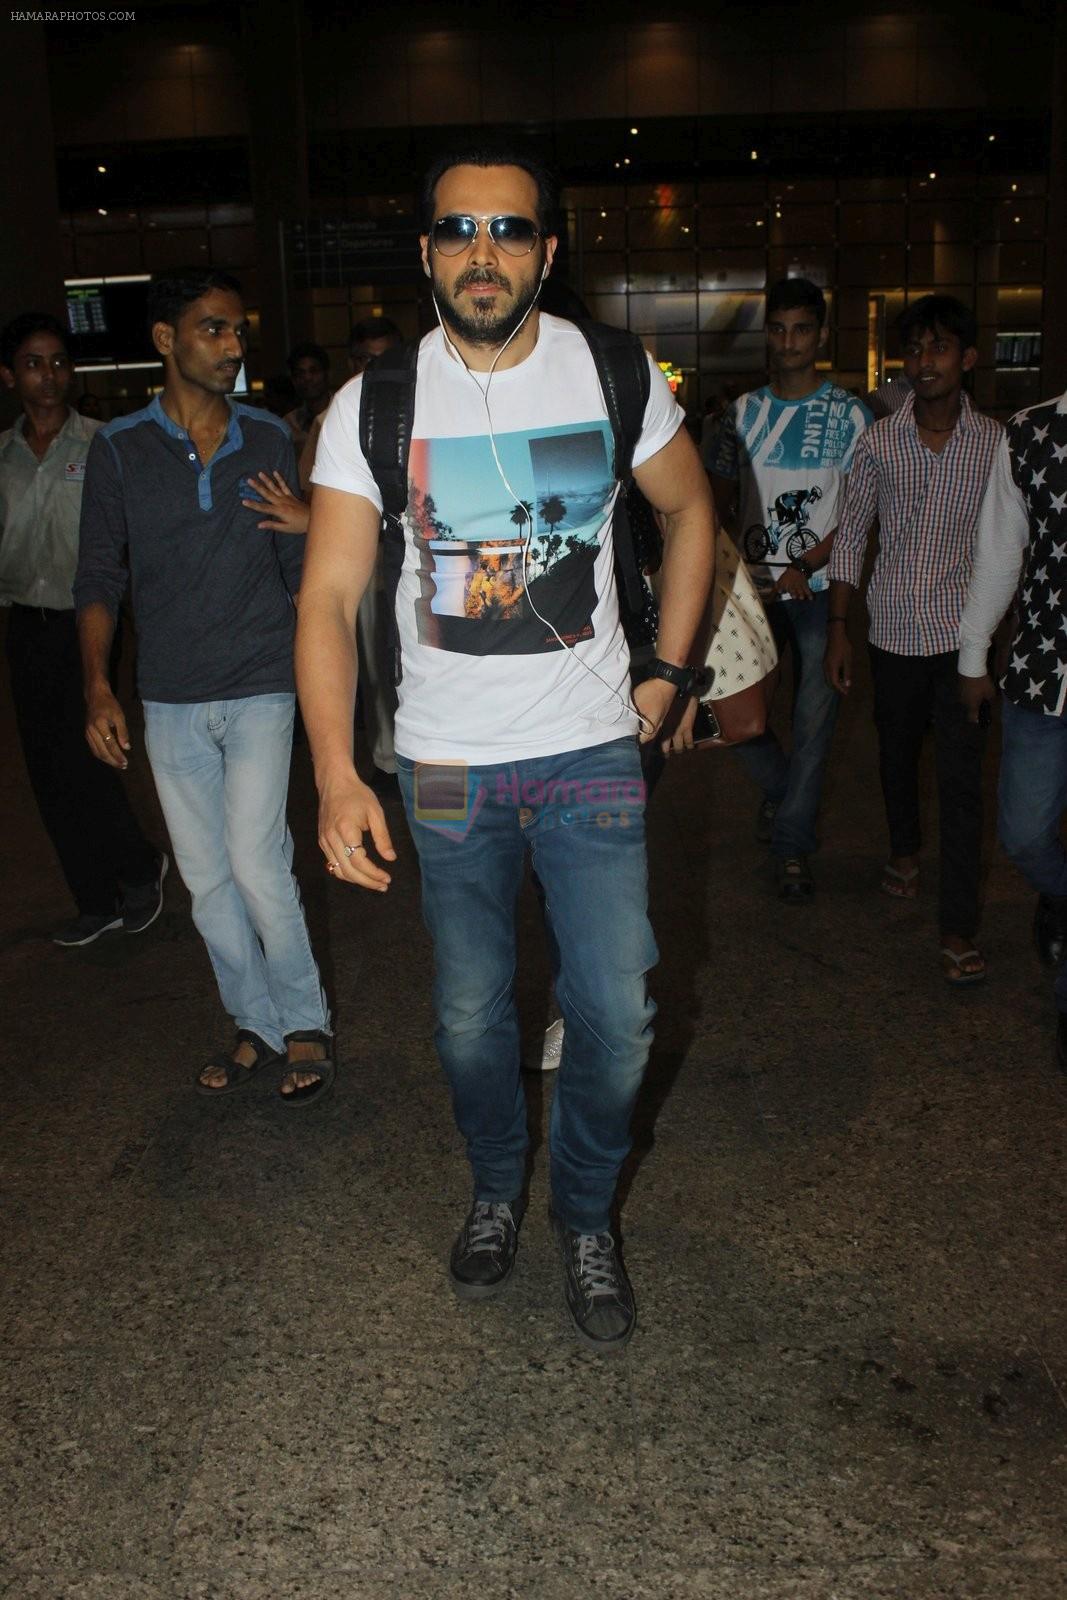 Emraan hashmi snapped at the airport on 13th May 2016